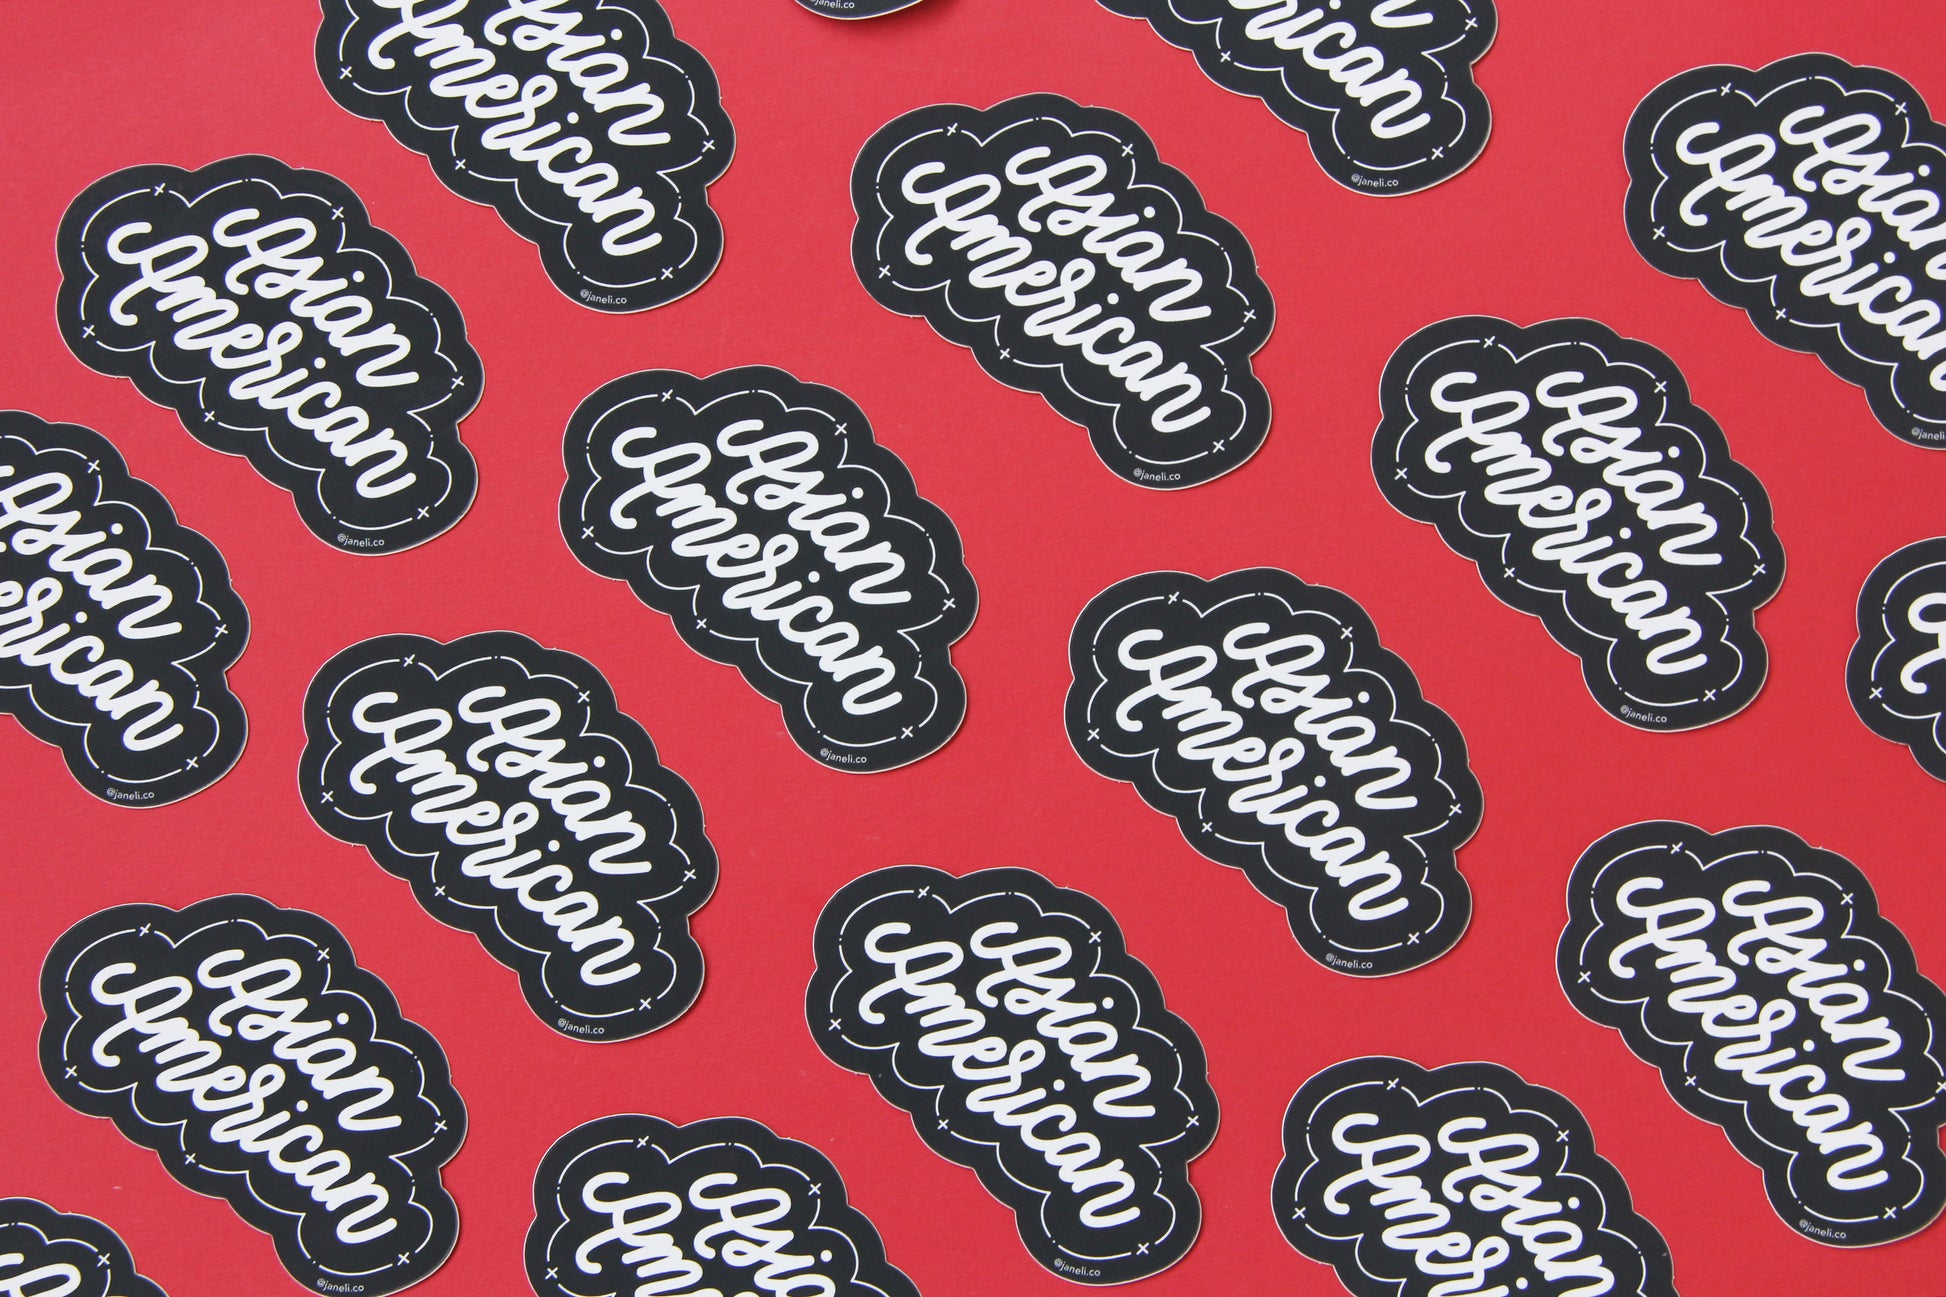 A grid of black and white JaneLi.Co stickers that say "Asian American" in cursive lettering over a red background.